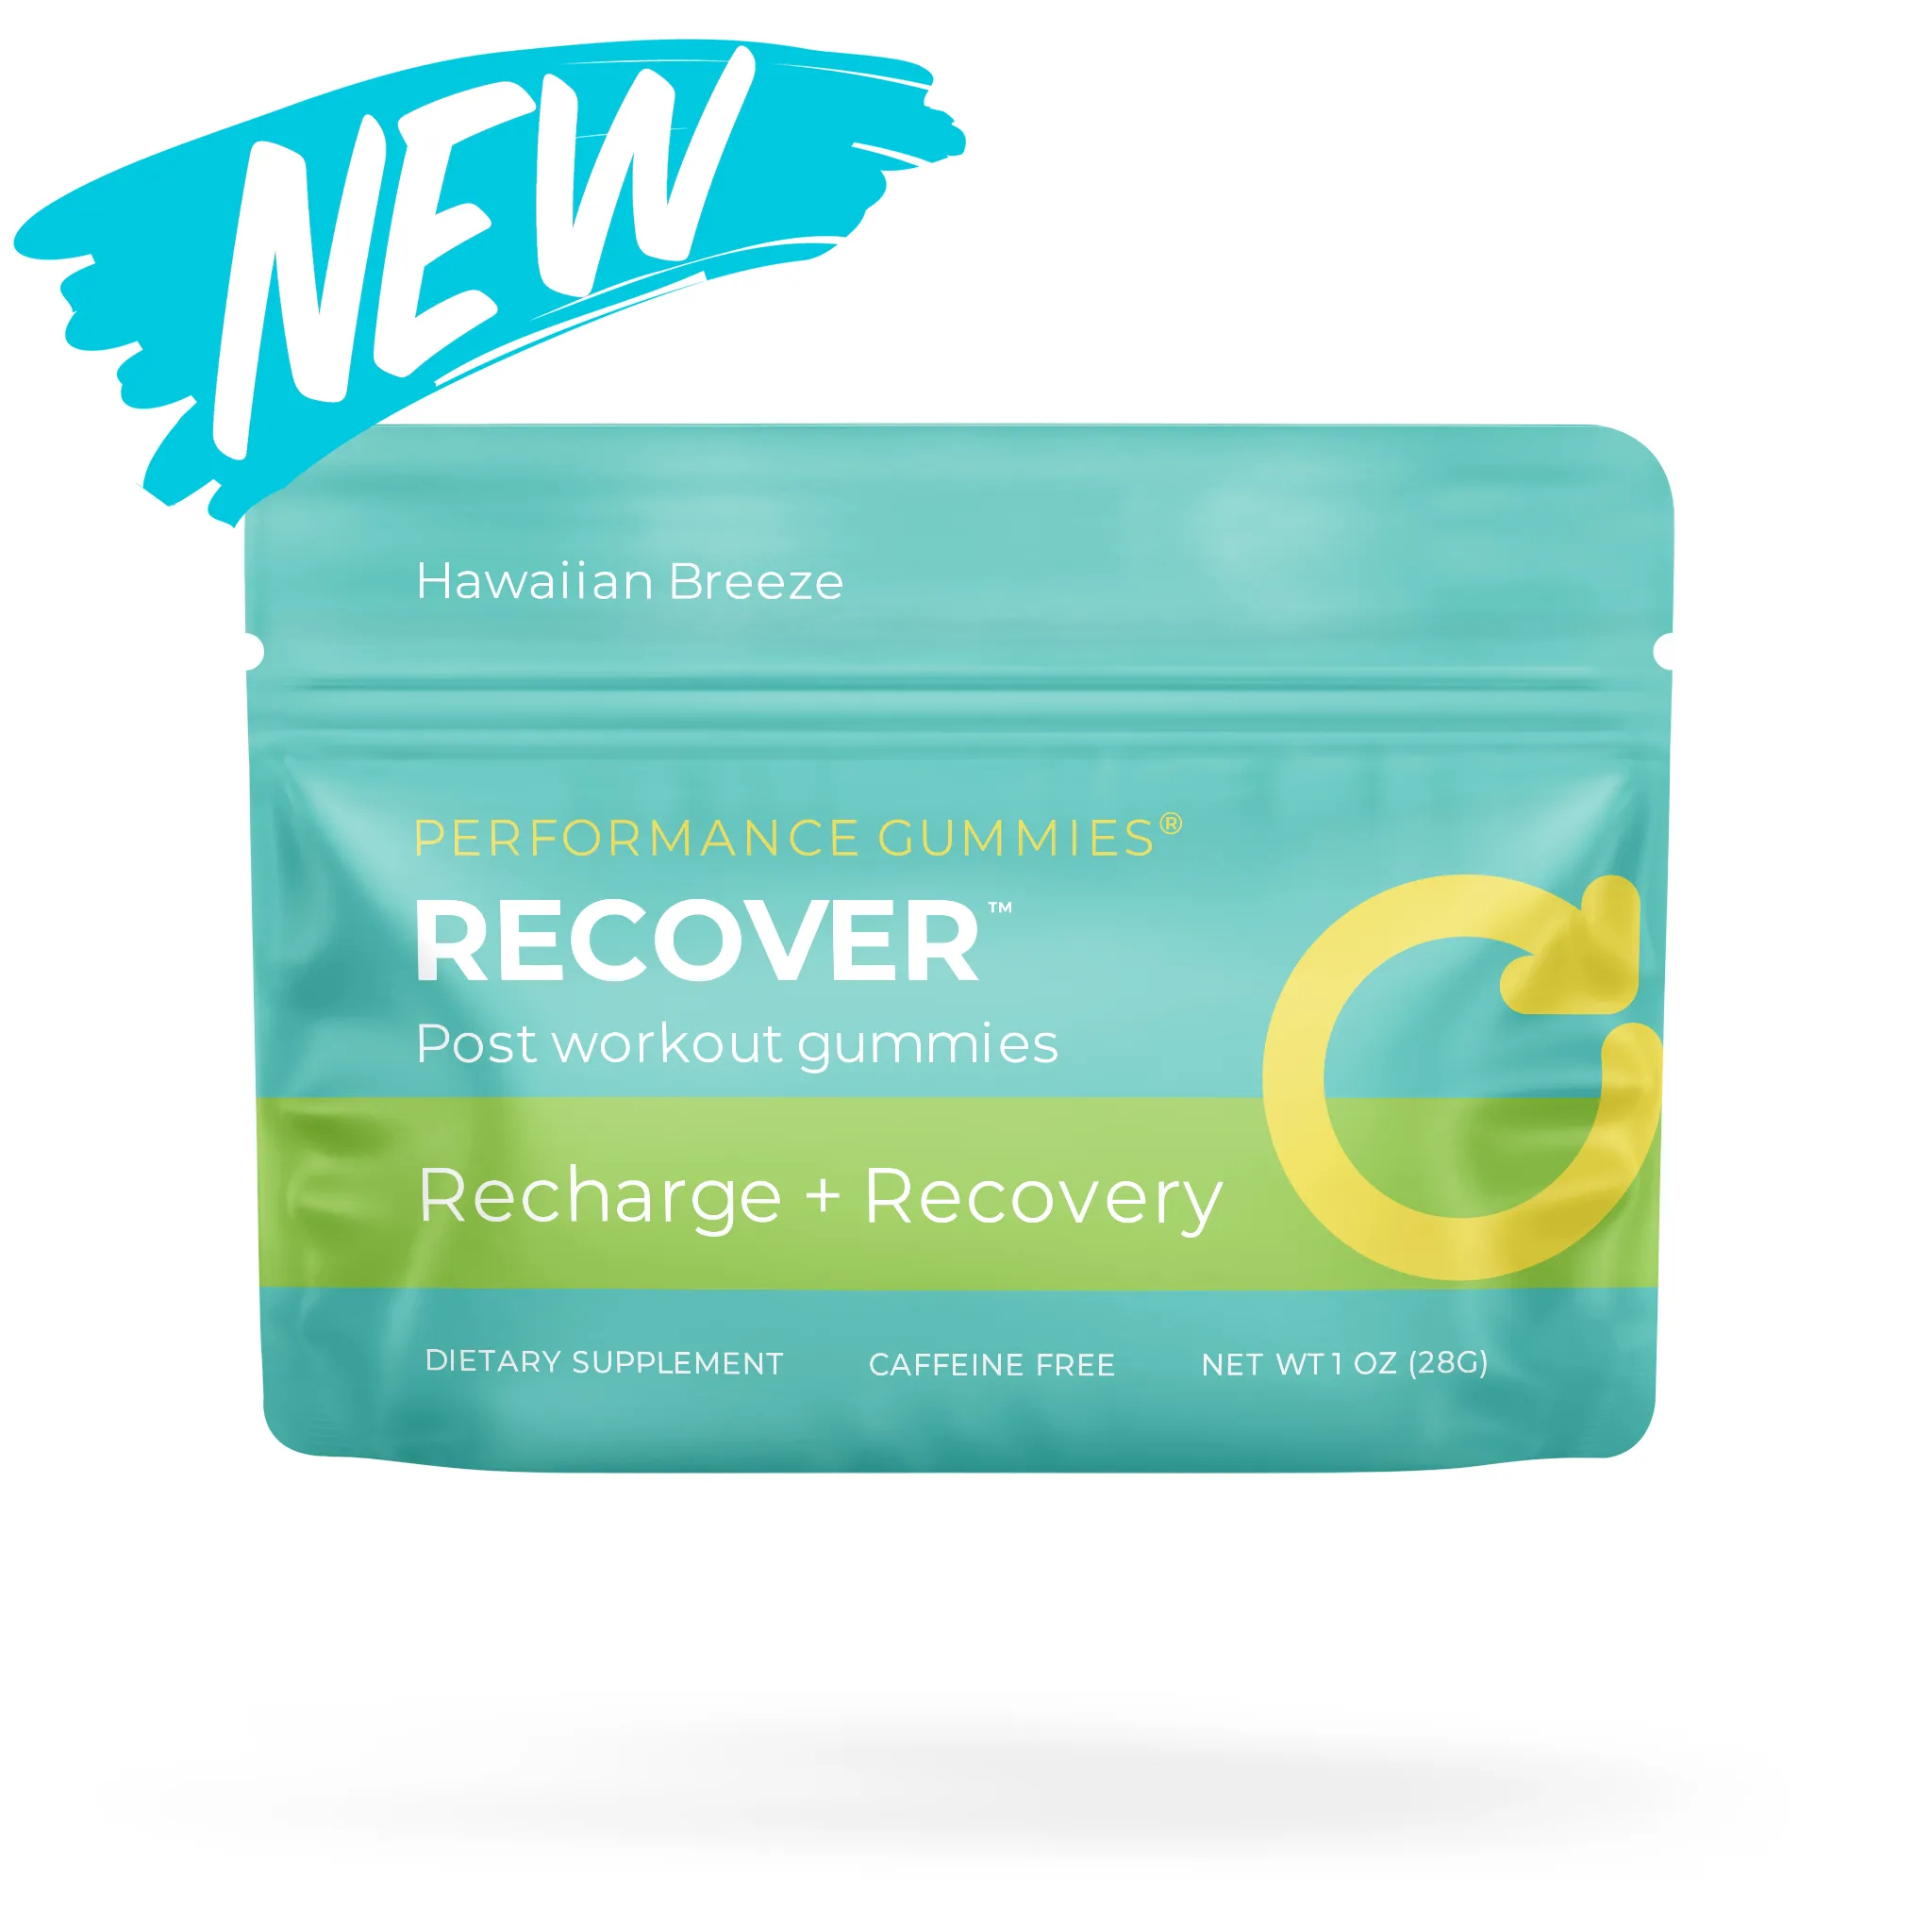 Hawaiian breeze recover pouch - new